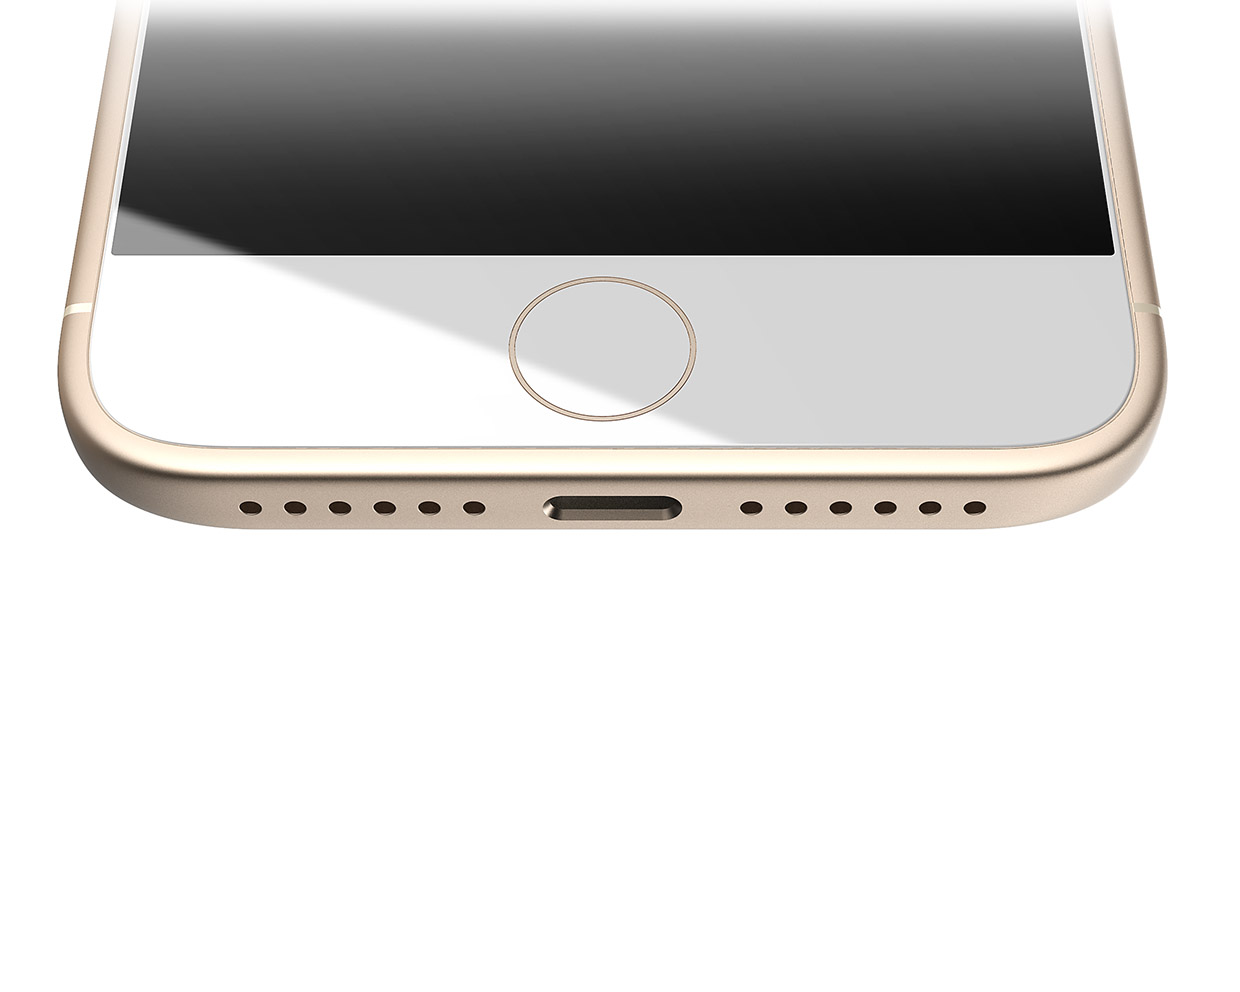 Awesome iPhone 7 Concept Has All Its Rumored Features [Video]